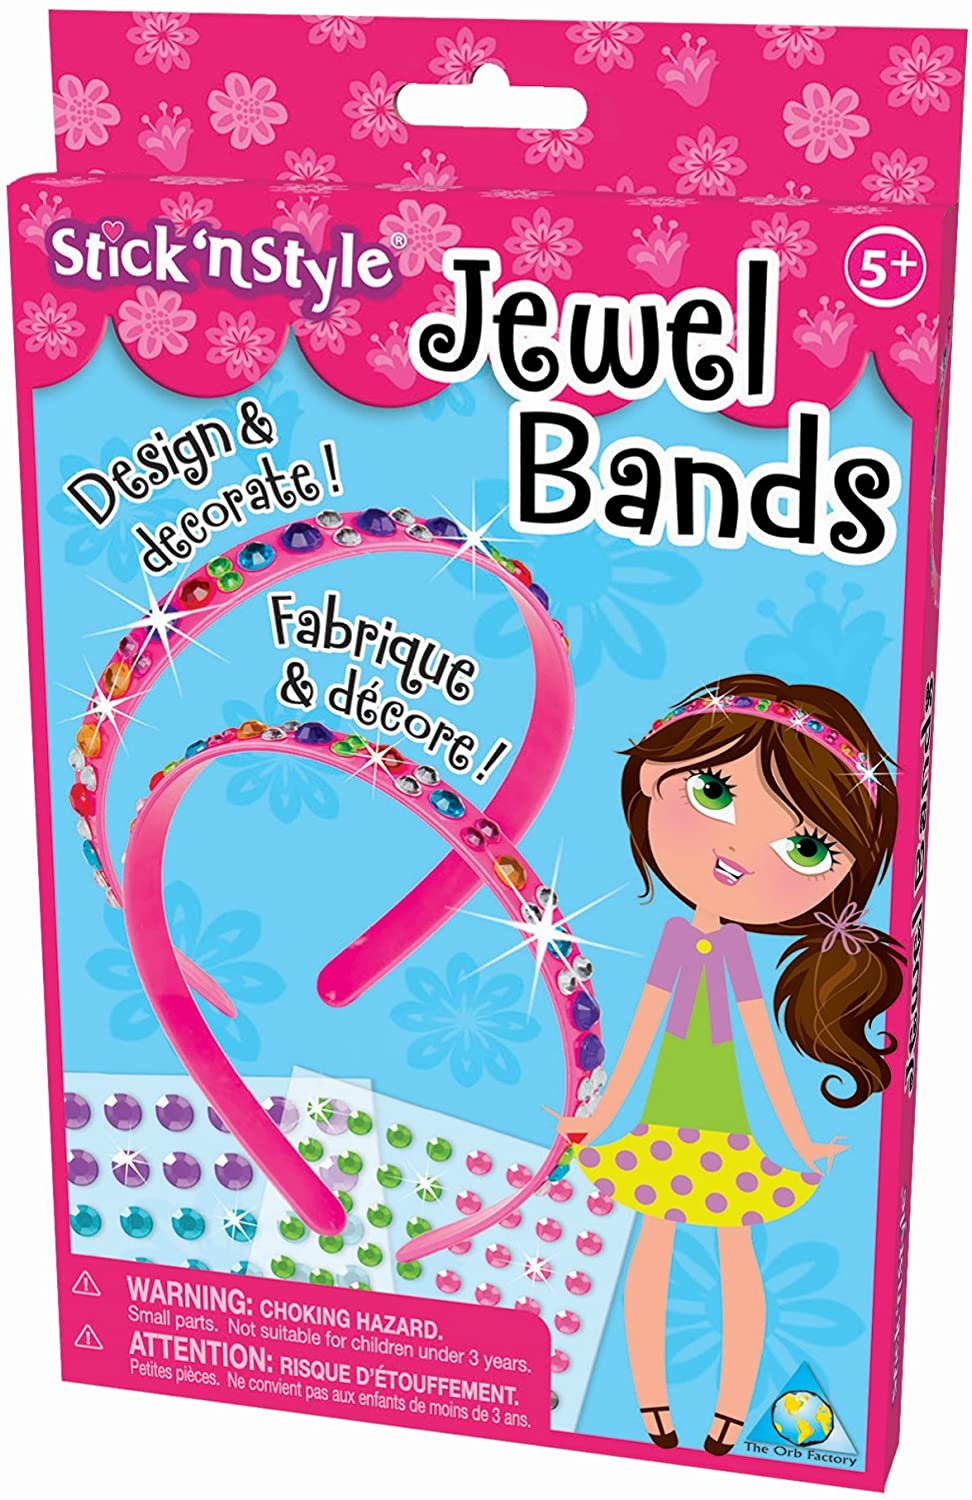 ORB FACTORY Stick n Style Jewel Bands